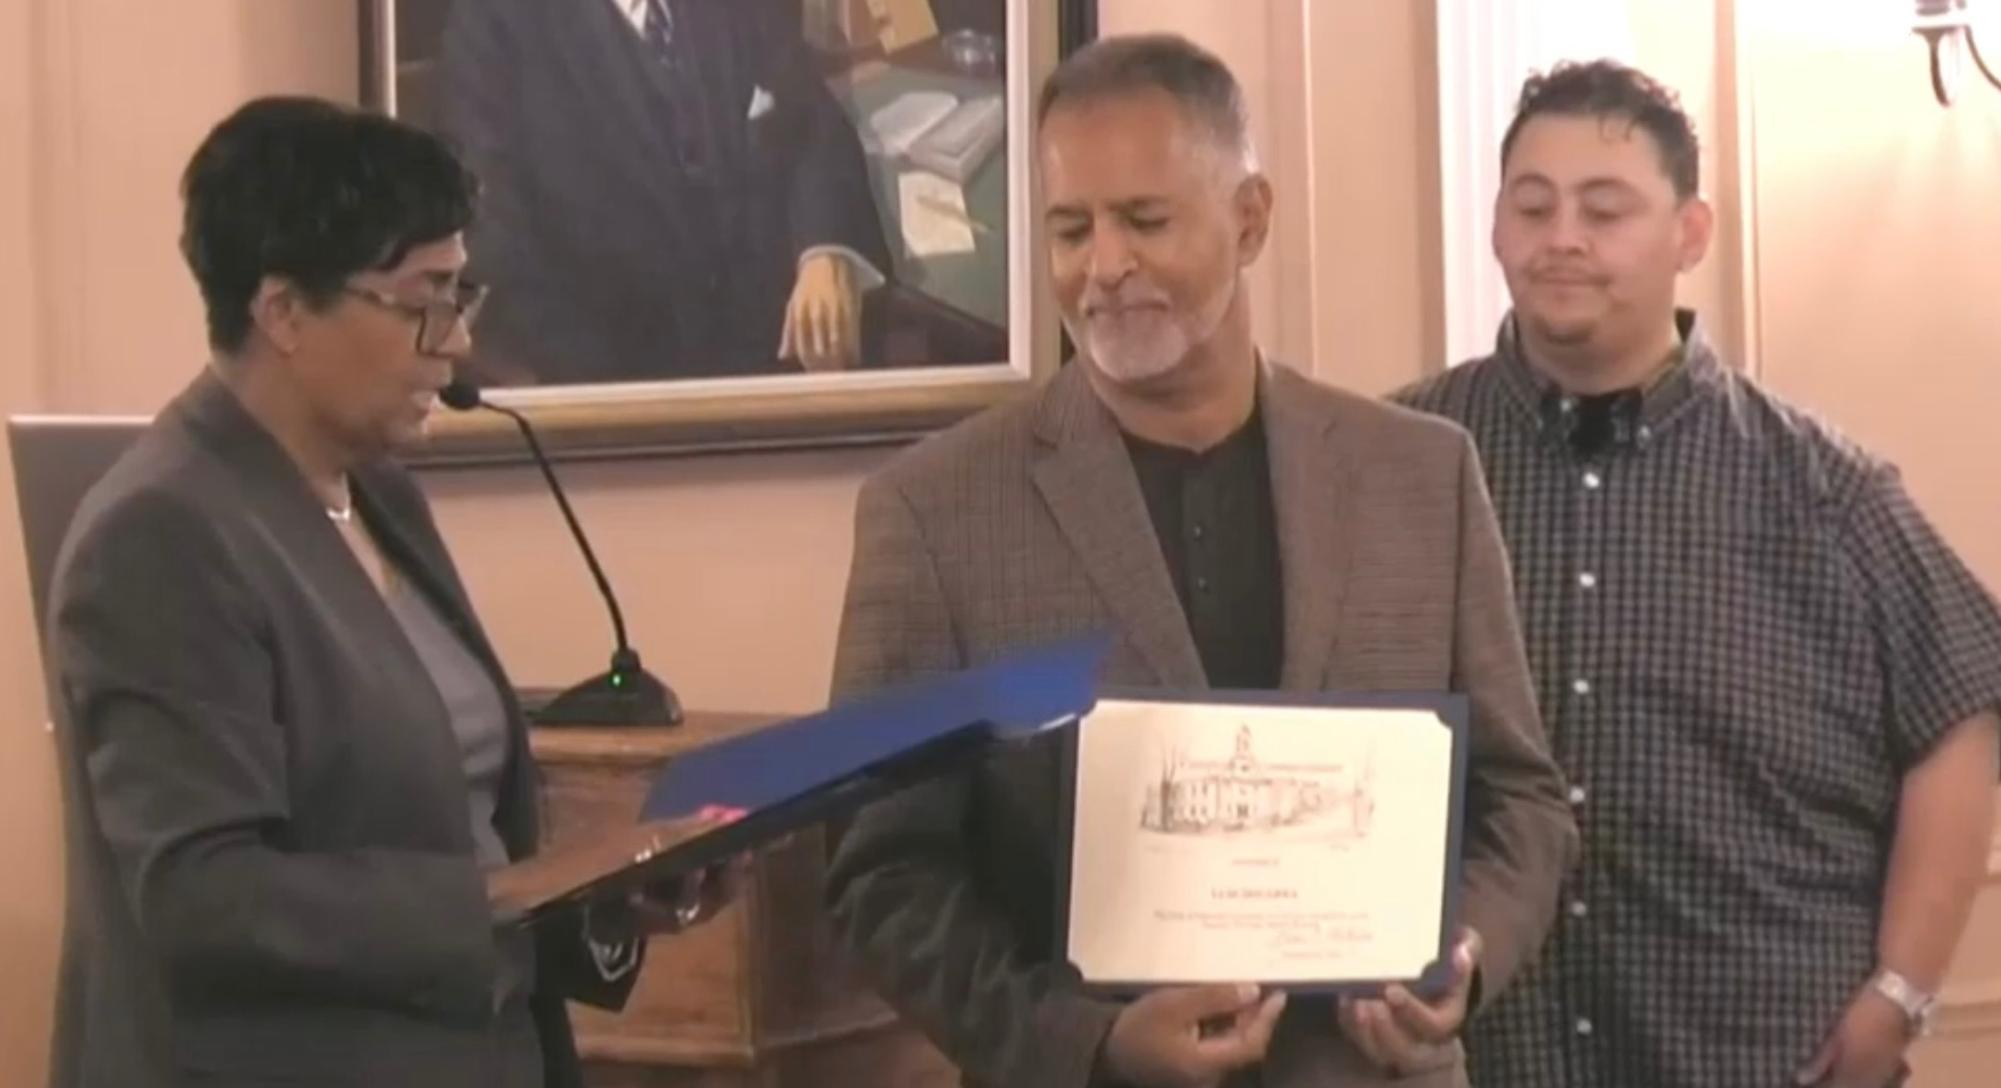 Mayor Vivian McKenzie reading from a proclamation. Holding certificate is Luis Segarra and Roy Escobar behind him. 